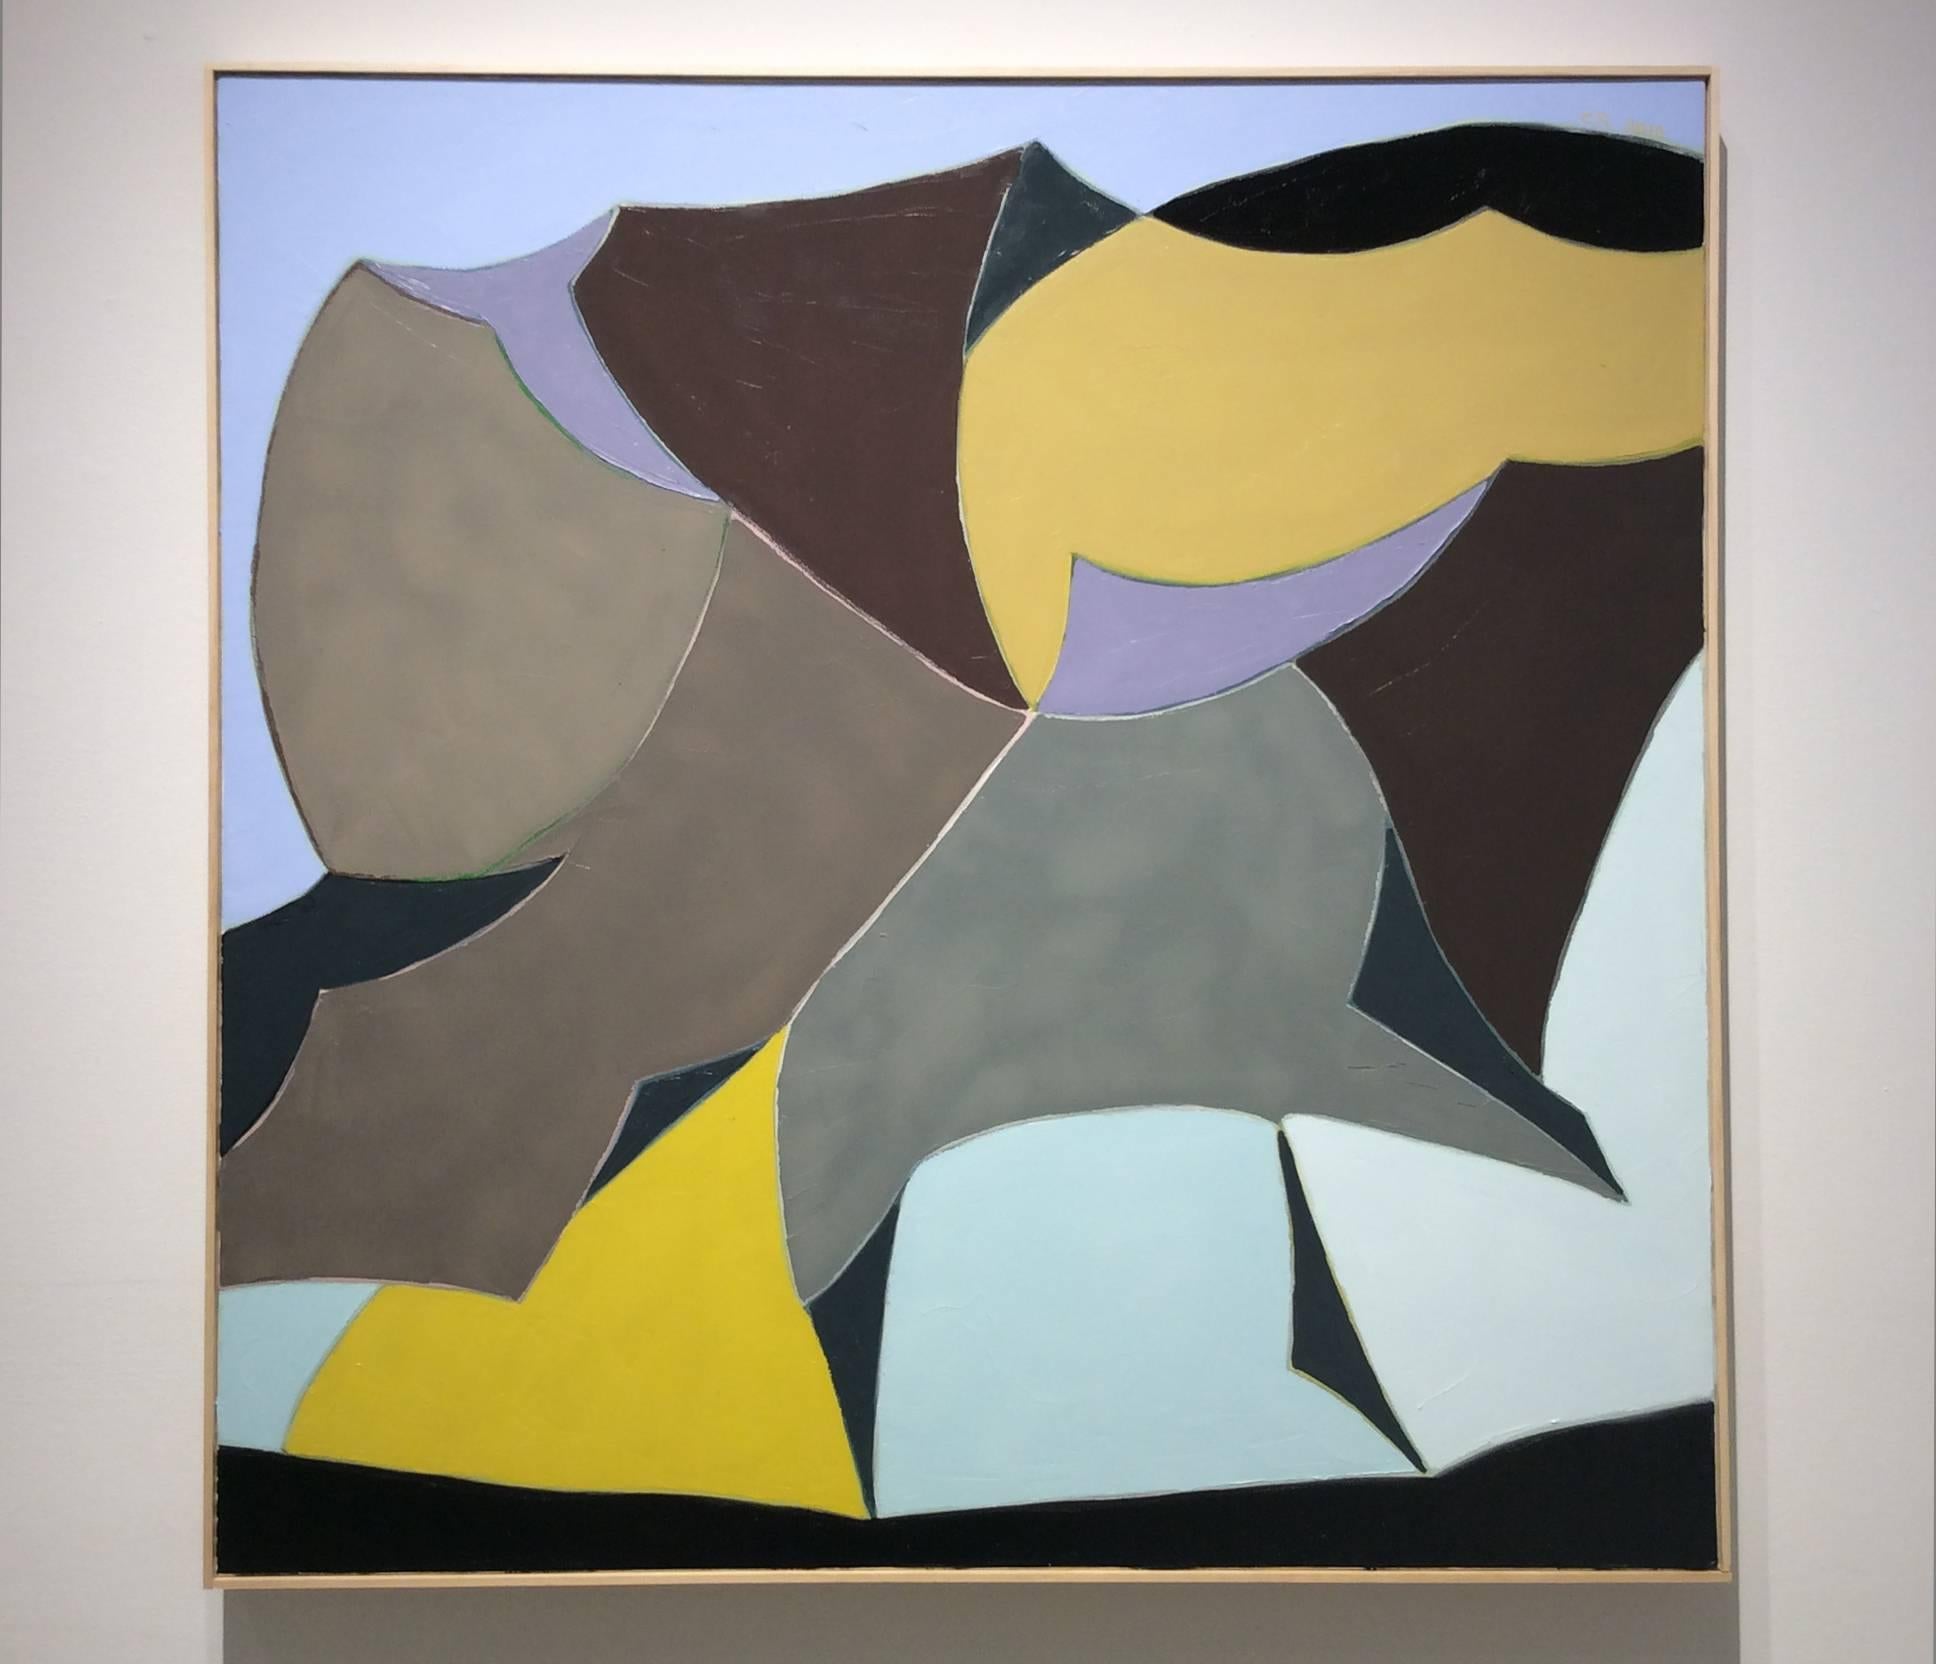 Black Pearl: Contemporary Abstract Geometric, Bold Swaths of Color - Painting by Corinne Robbins